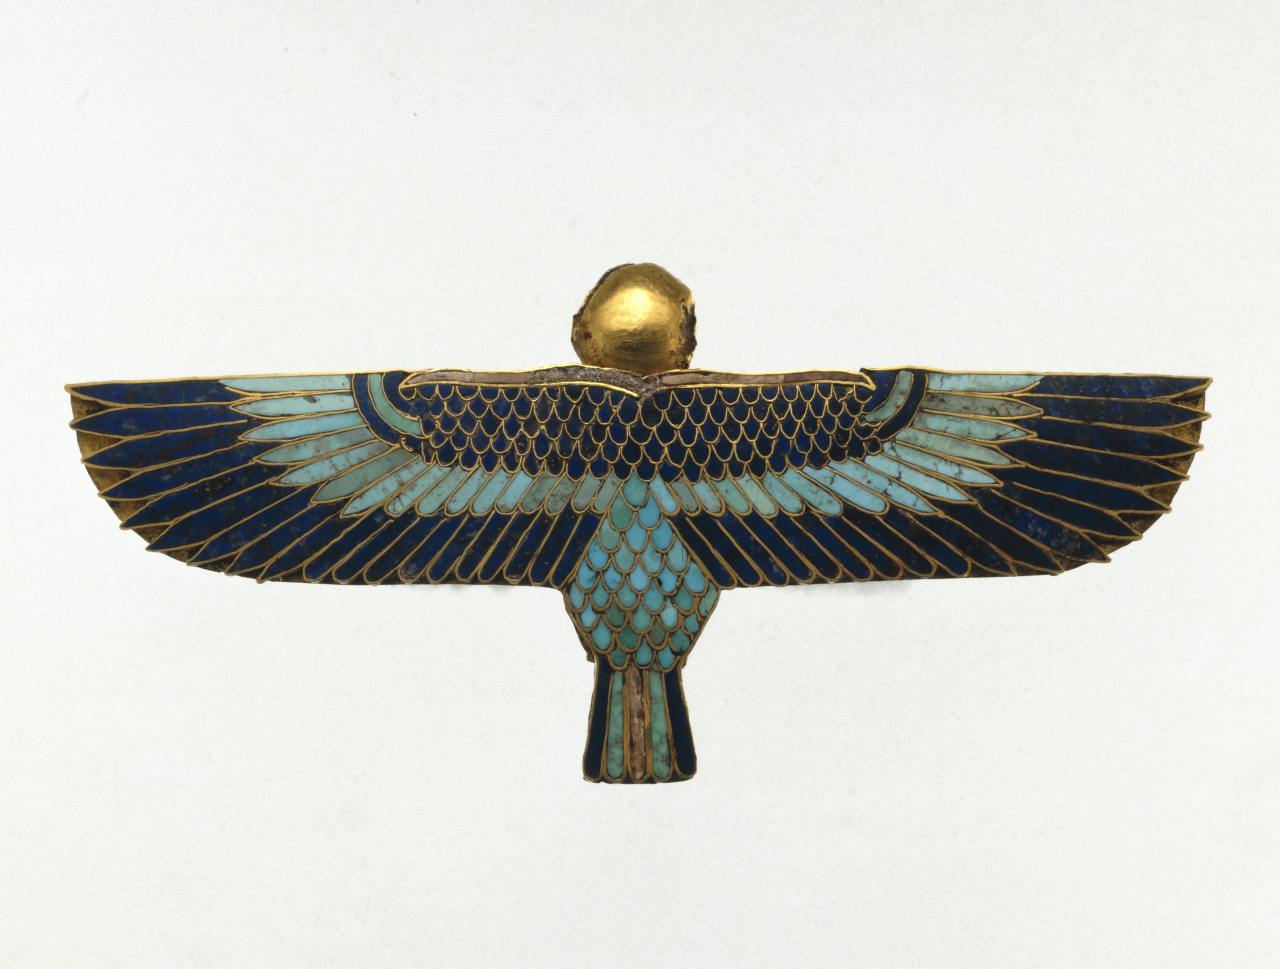 A bird shaped “ba,” meaning “soul” in Egyptian mythology, which functions as an amulet (NMK)